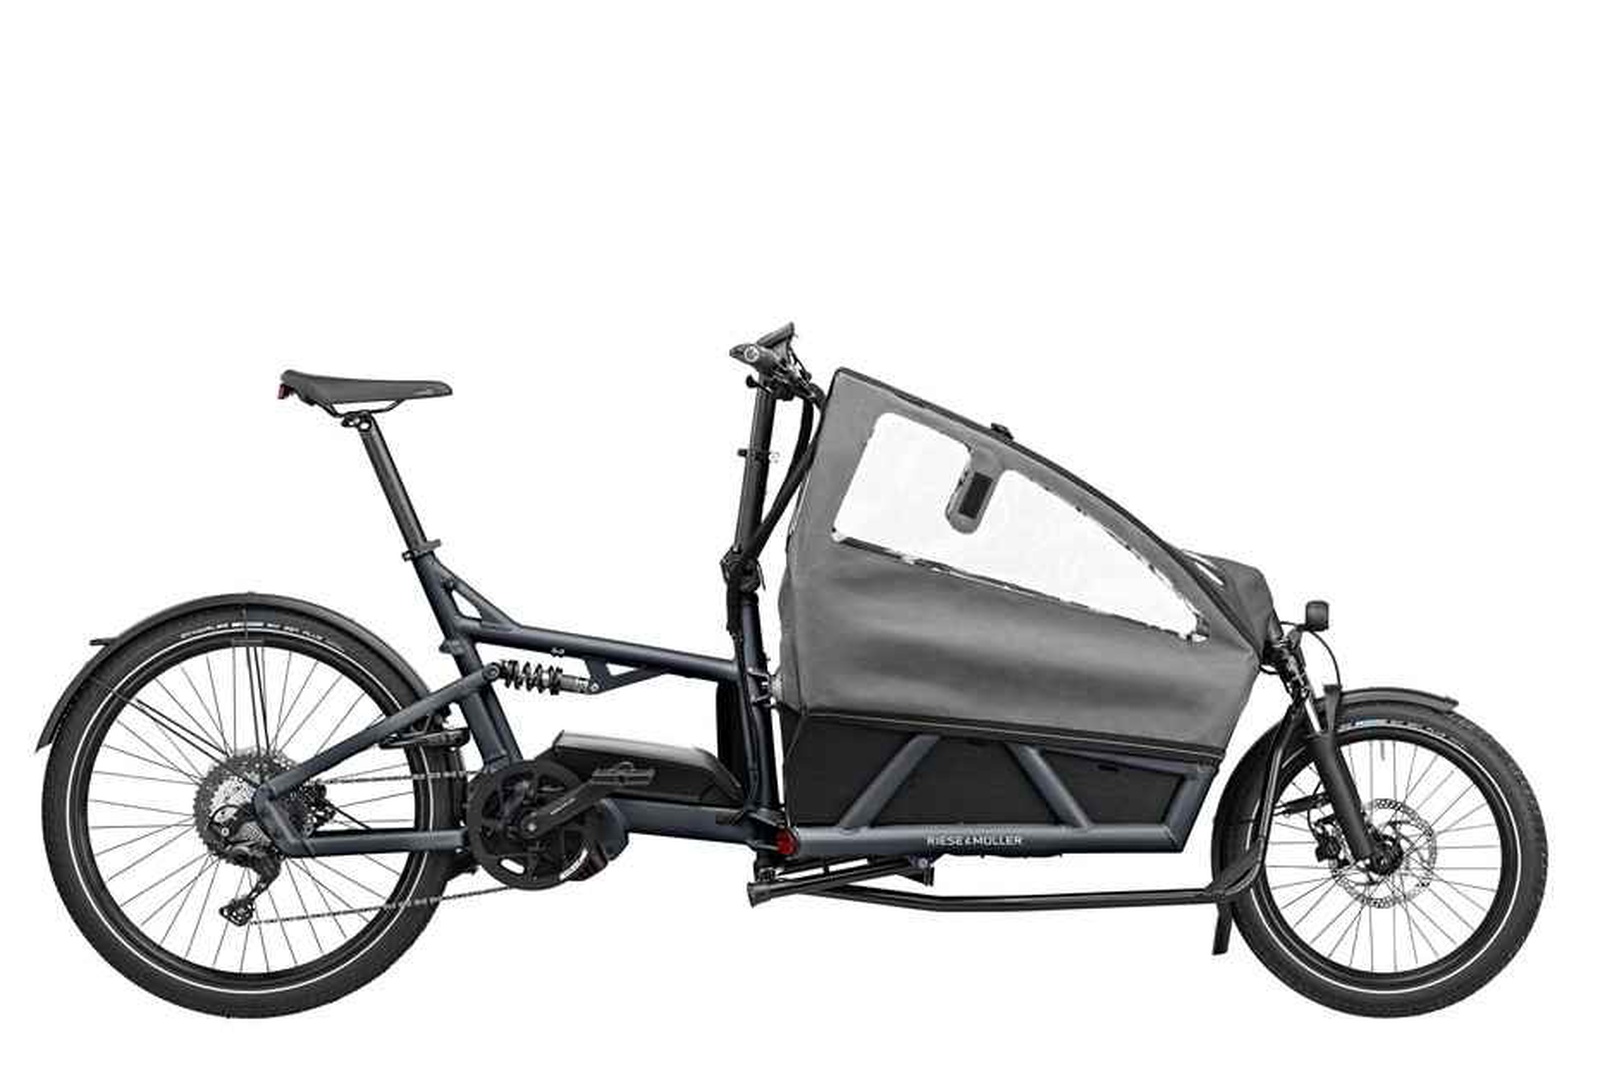 Load 60 touring 1000Wh